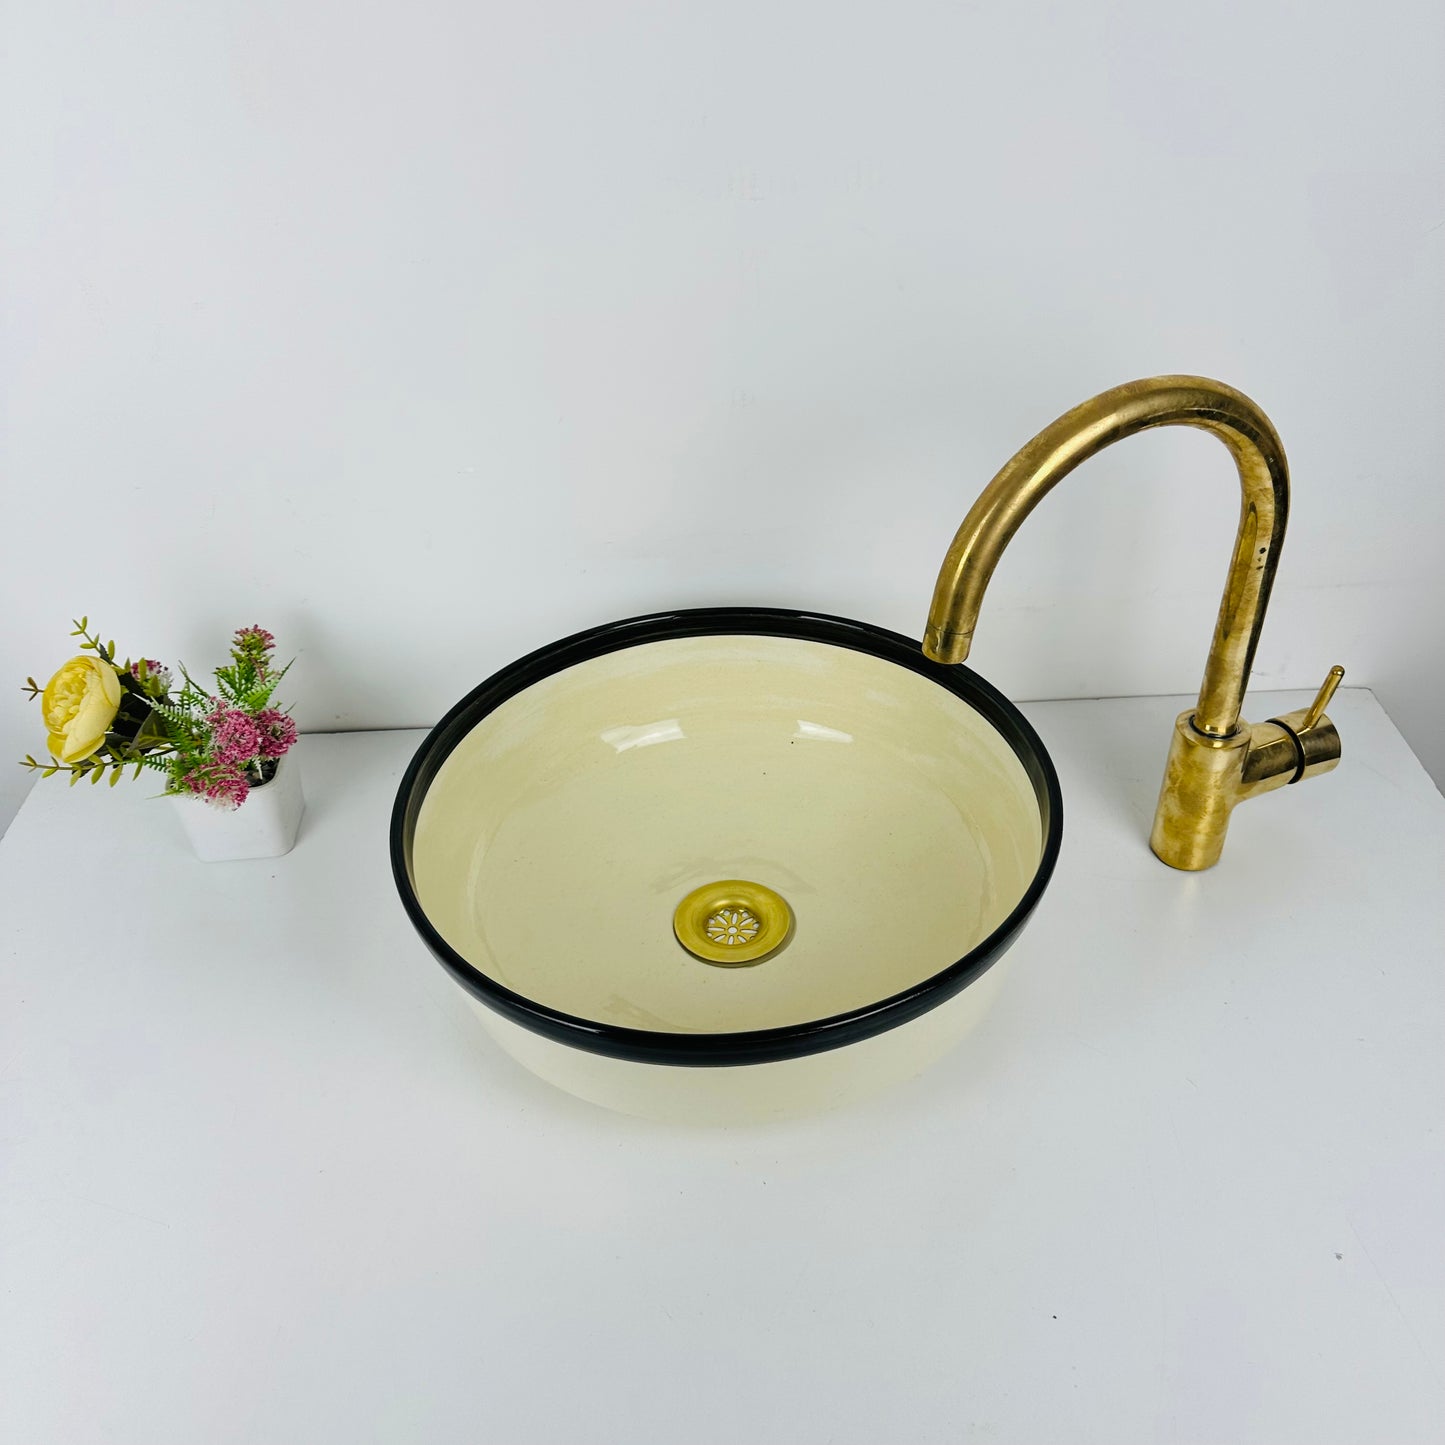 Color Crest: Handcrafted Ceramic Sink with Topped black Finish